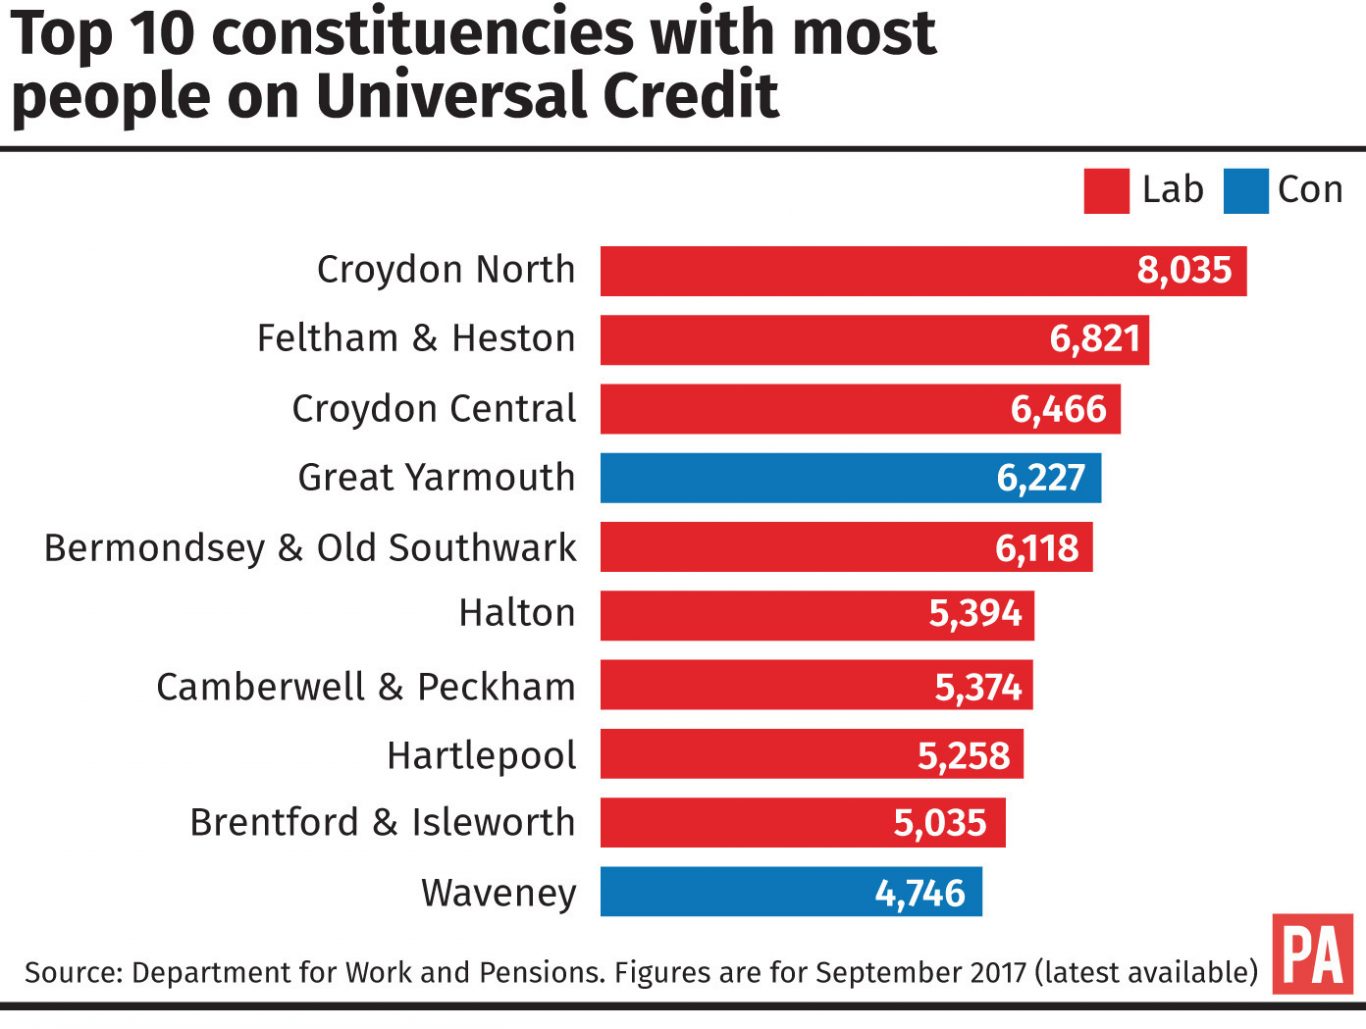 Top 10 constituencies with the most people on Universal Credit